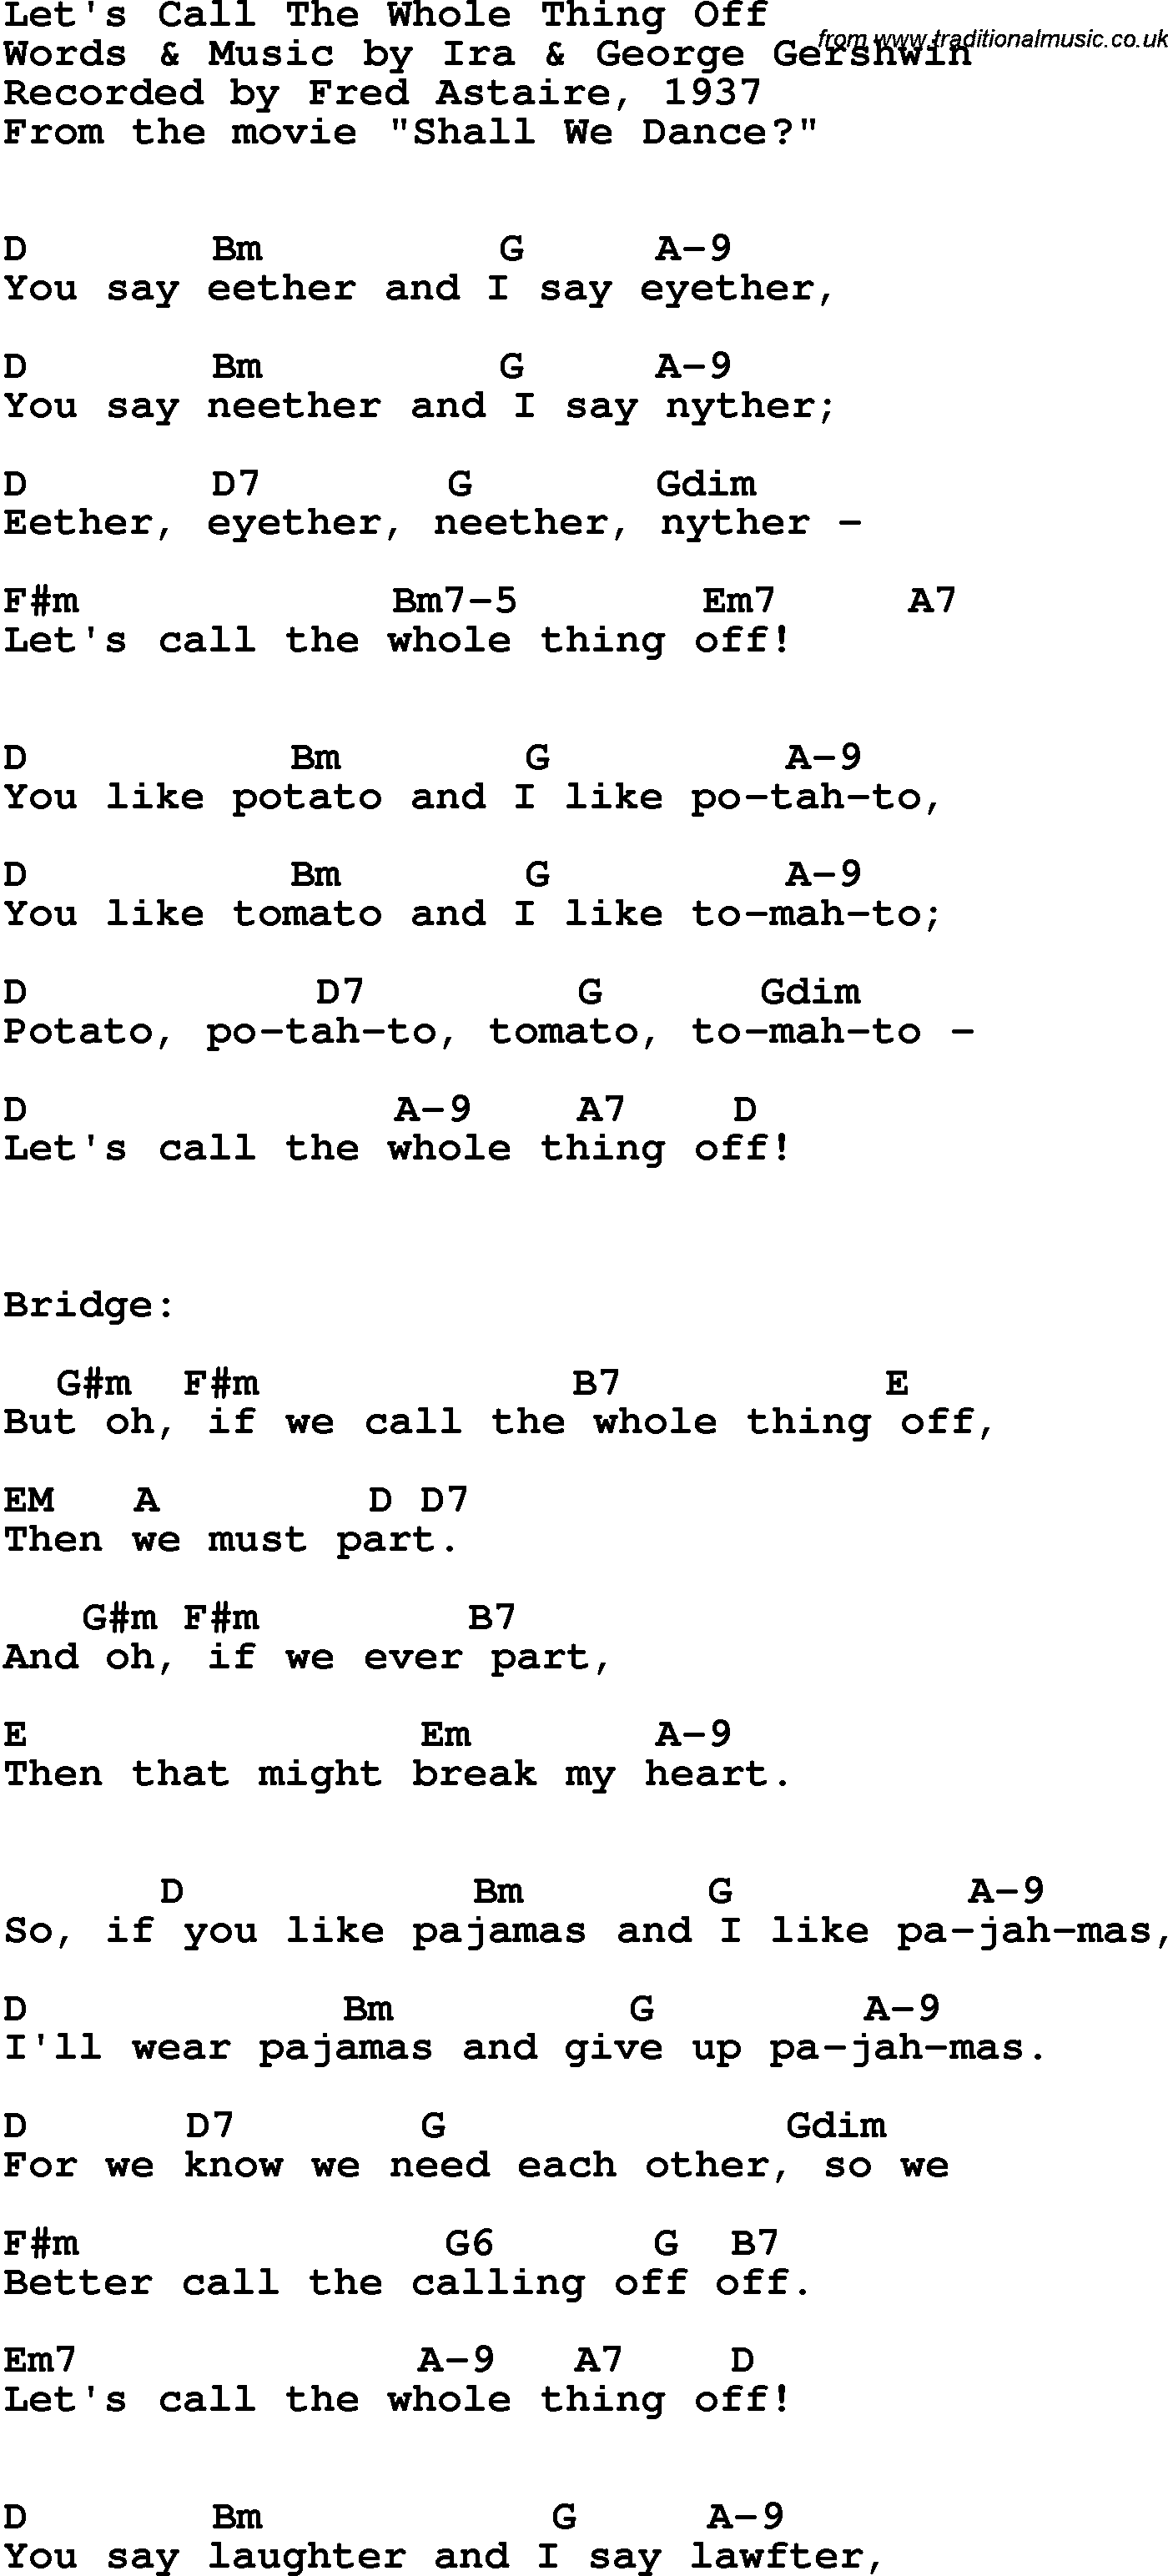 Song Lyrics with guitar chords for Let's Call The Whole Thing Off - Fred Astaire, 1937